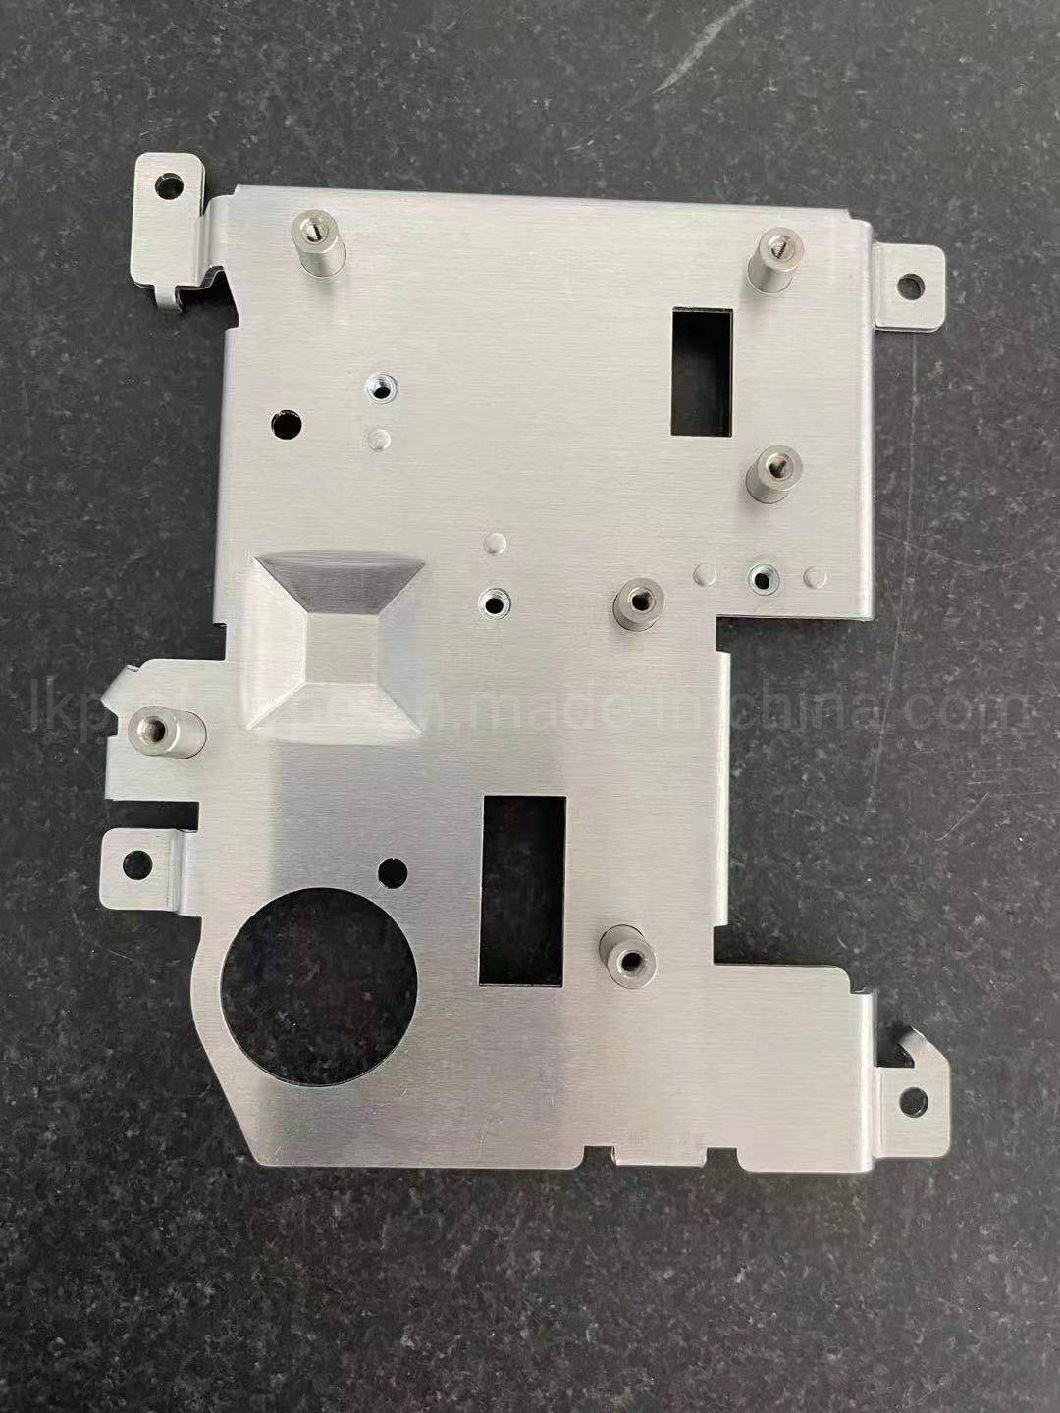 High Precision Aluminum/Metal Plate Parts CNC Milling/Turning/Machining Service